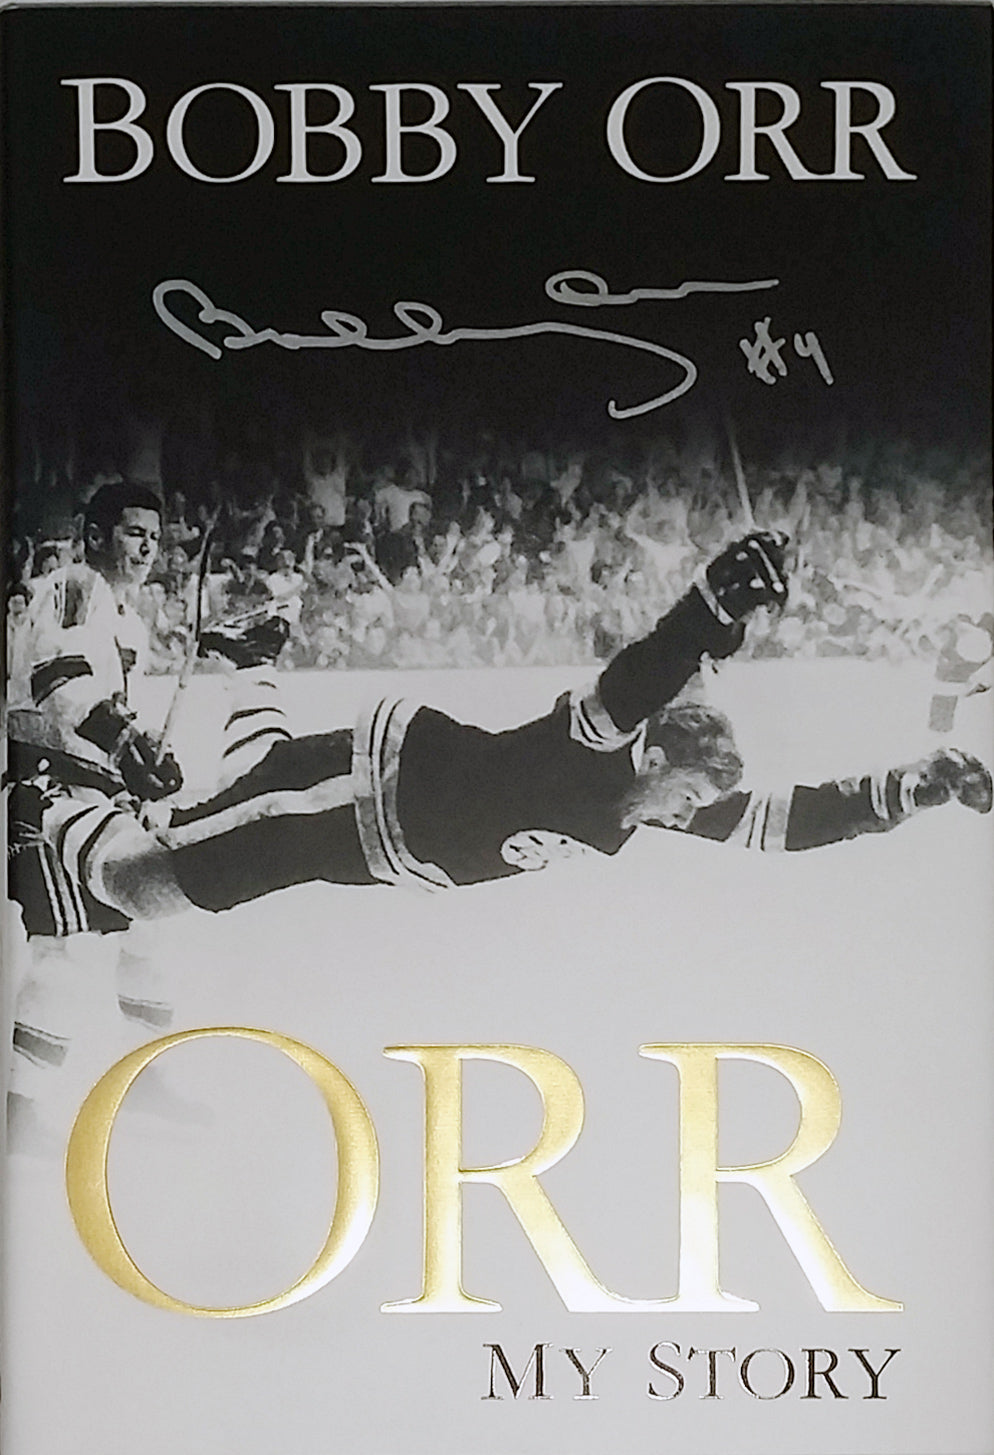 Bobby Orr "My Story" Book - Autographed - Boston Bruins, Boston Bruins, NHL, Hockey, Autographed, Signed, AACMH30189